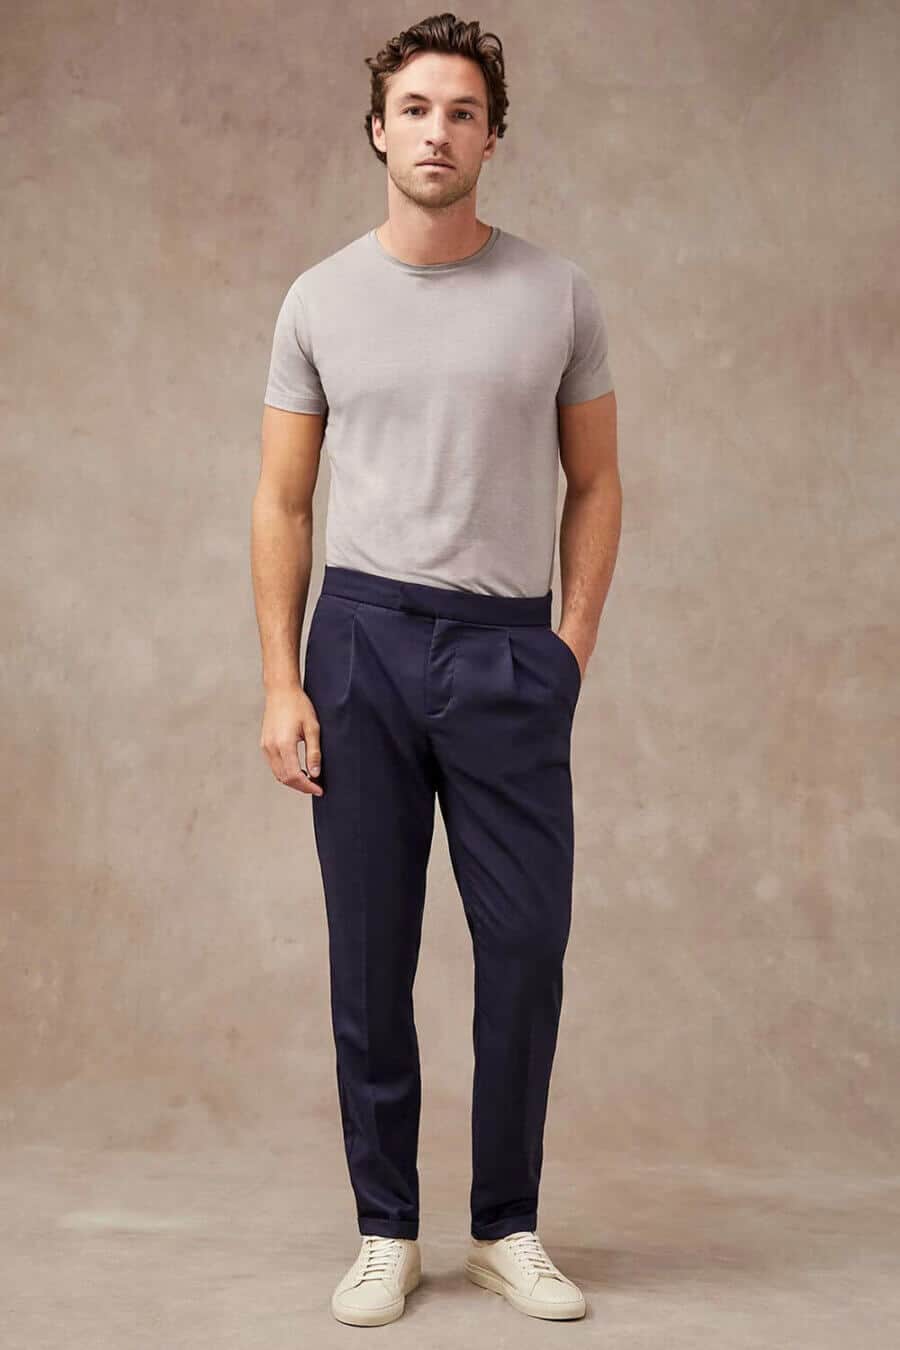 Men's simple summer outfit: t-shirt tucked into trousers with sneakers